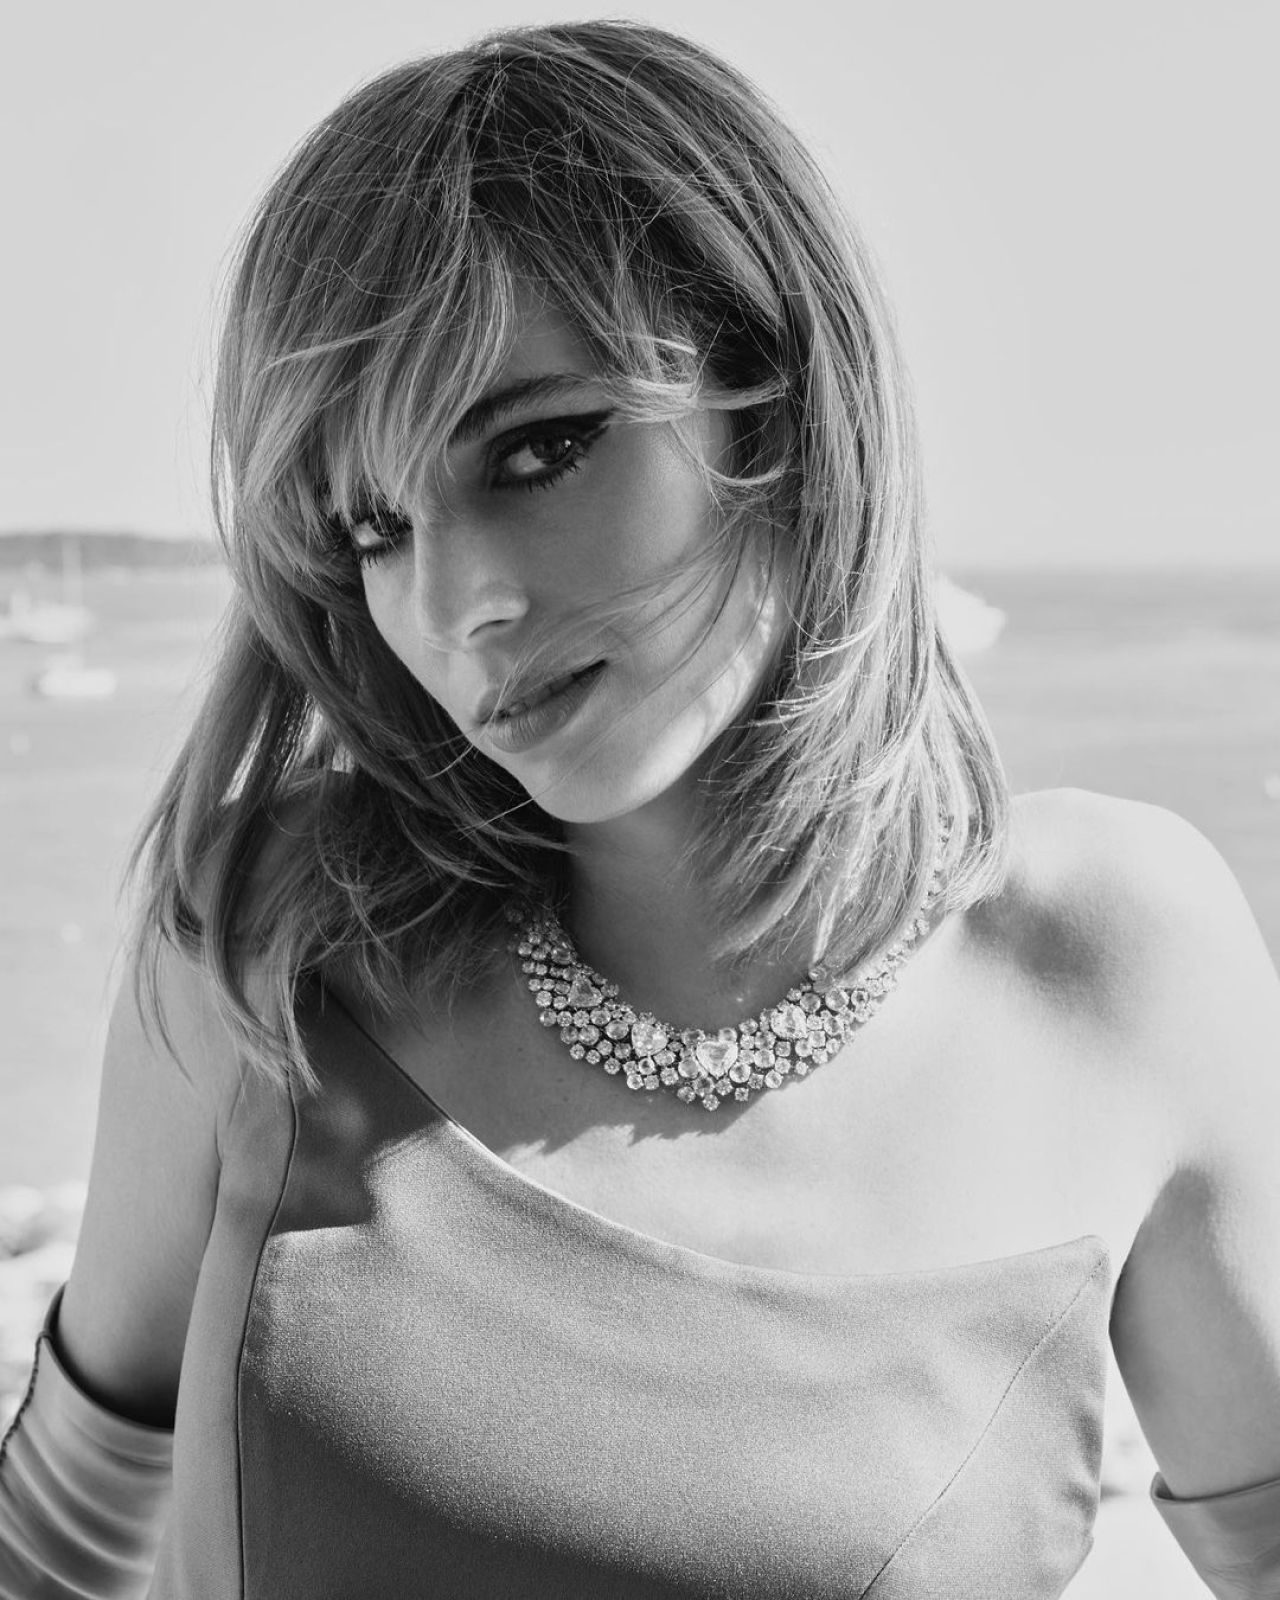 May 24, 2023, Cannes, Cote d'Azur, France: MAYA HAWKE attends the